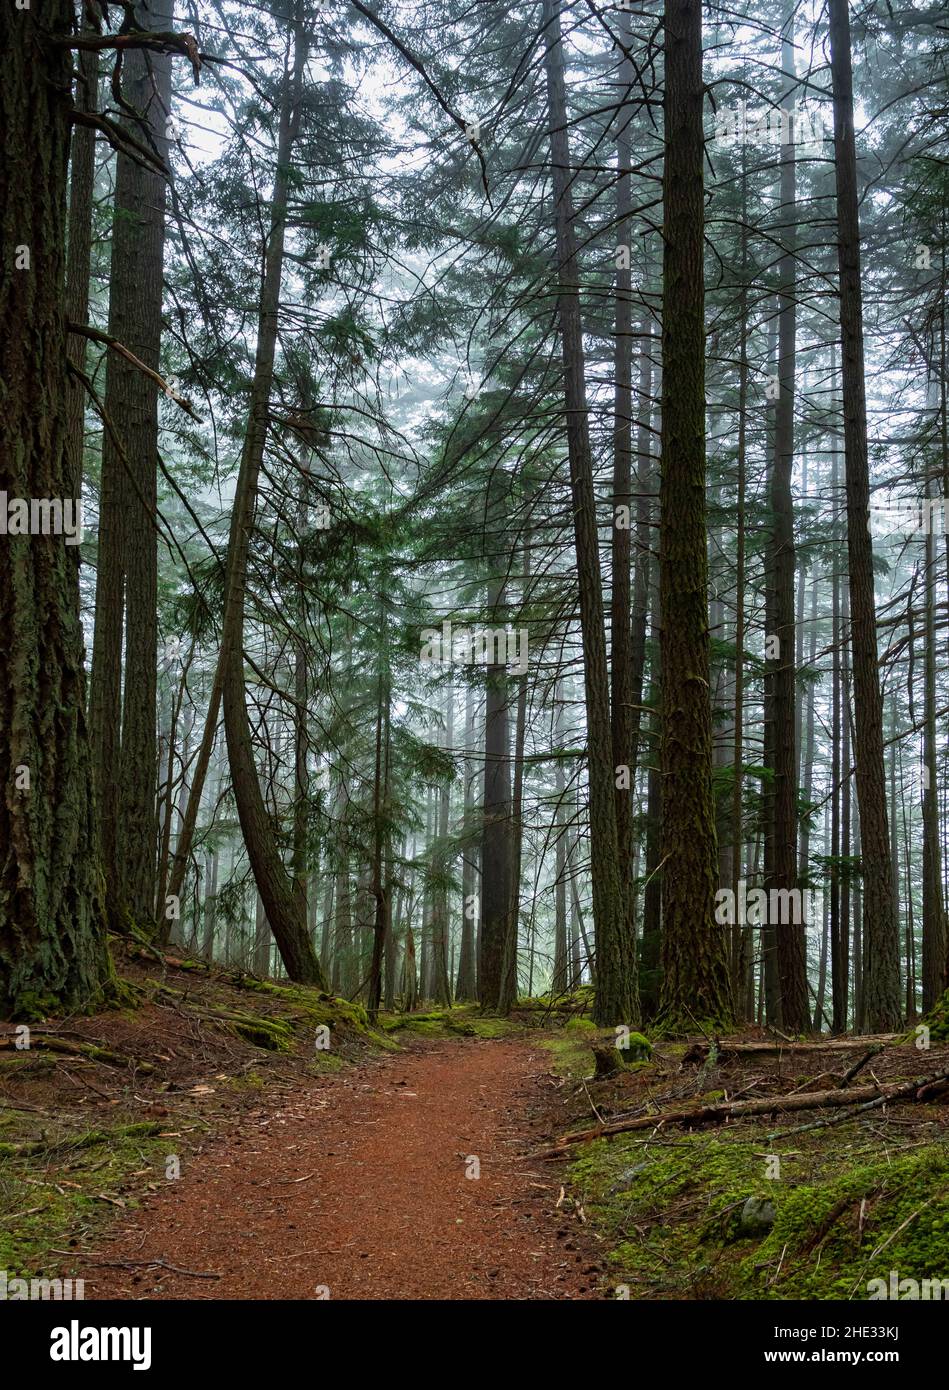 WA21036-00...WASHINGTON - The Mount Pickett Trail in a foggy forest of Moran State Park on Orcas Island, one of the San Juan Islands. Stock Photo